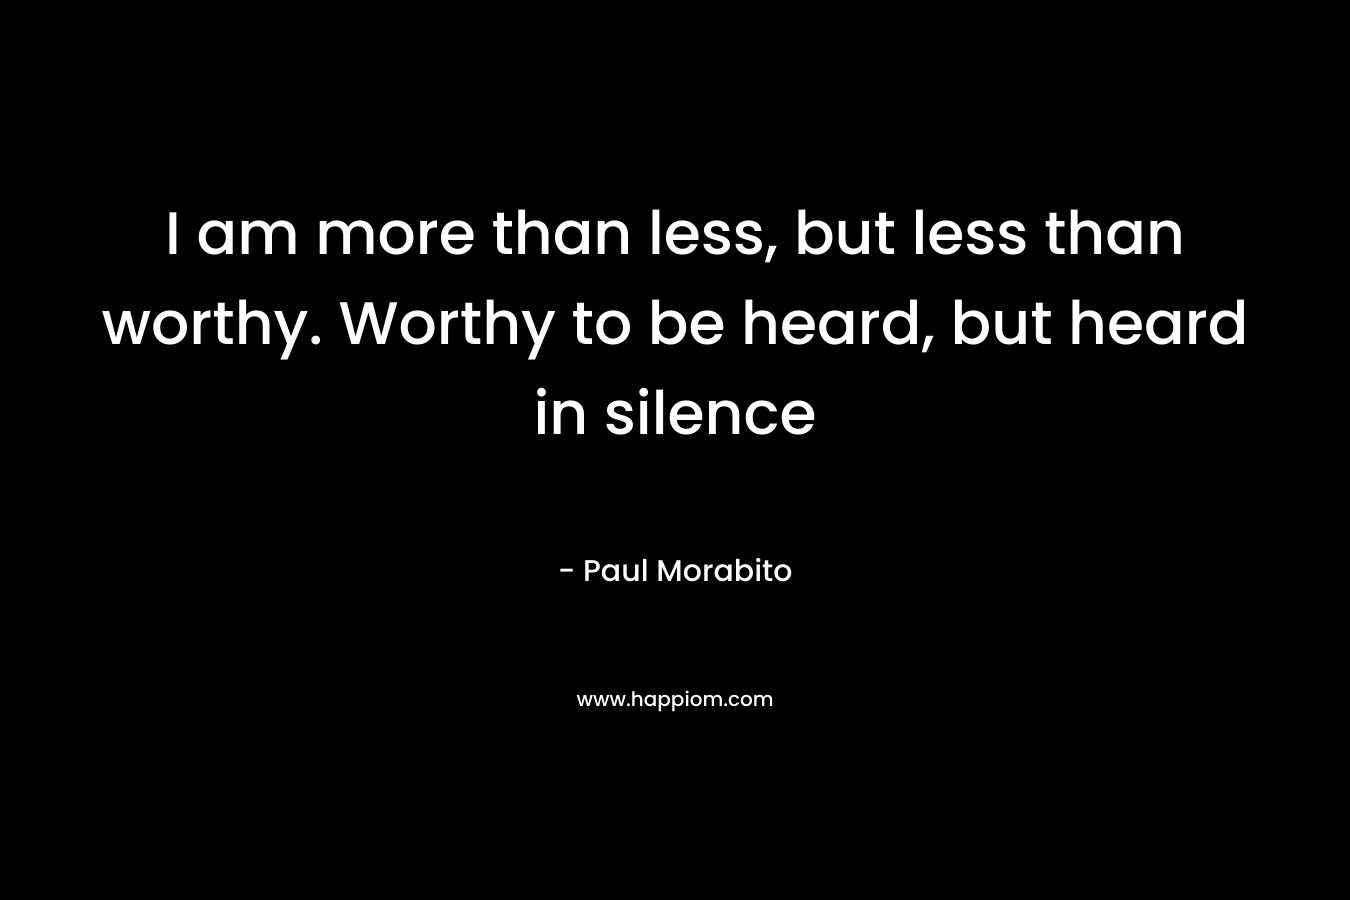 I am more than less, but less than worthy. Worthy to be heard, but heard in silence